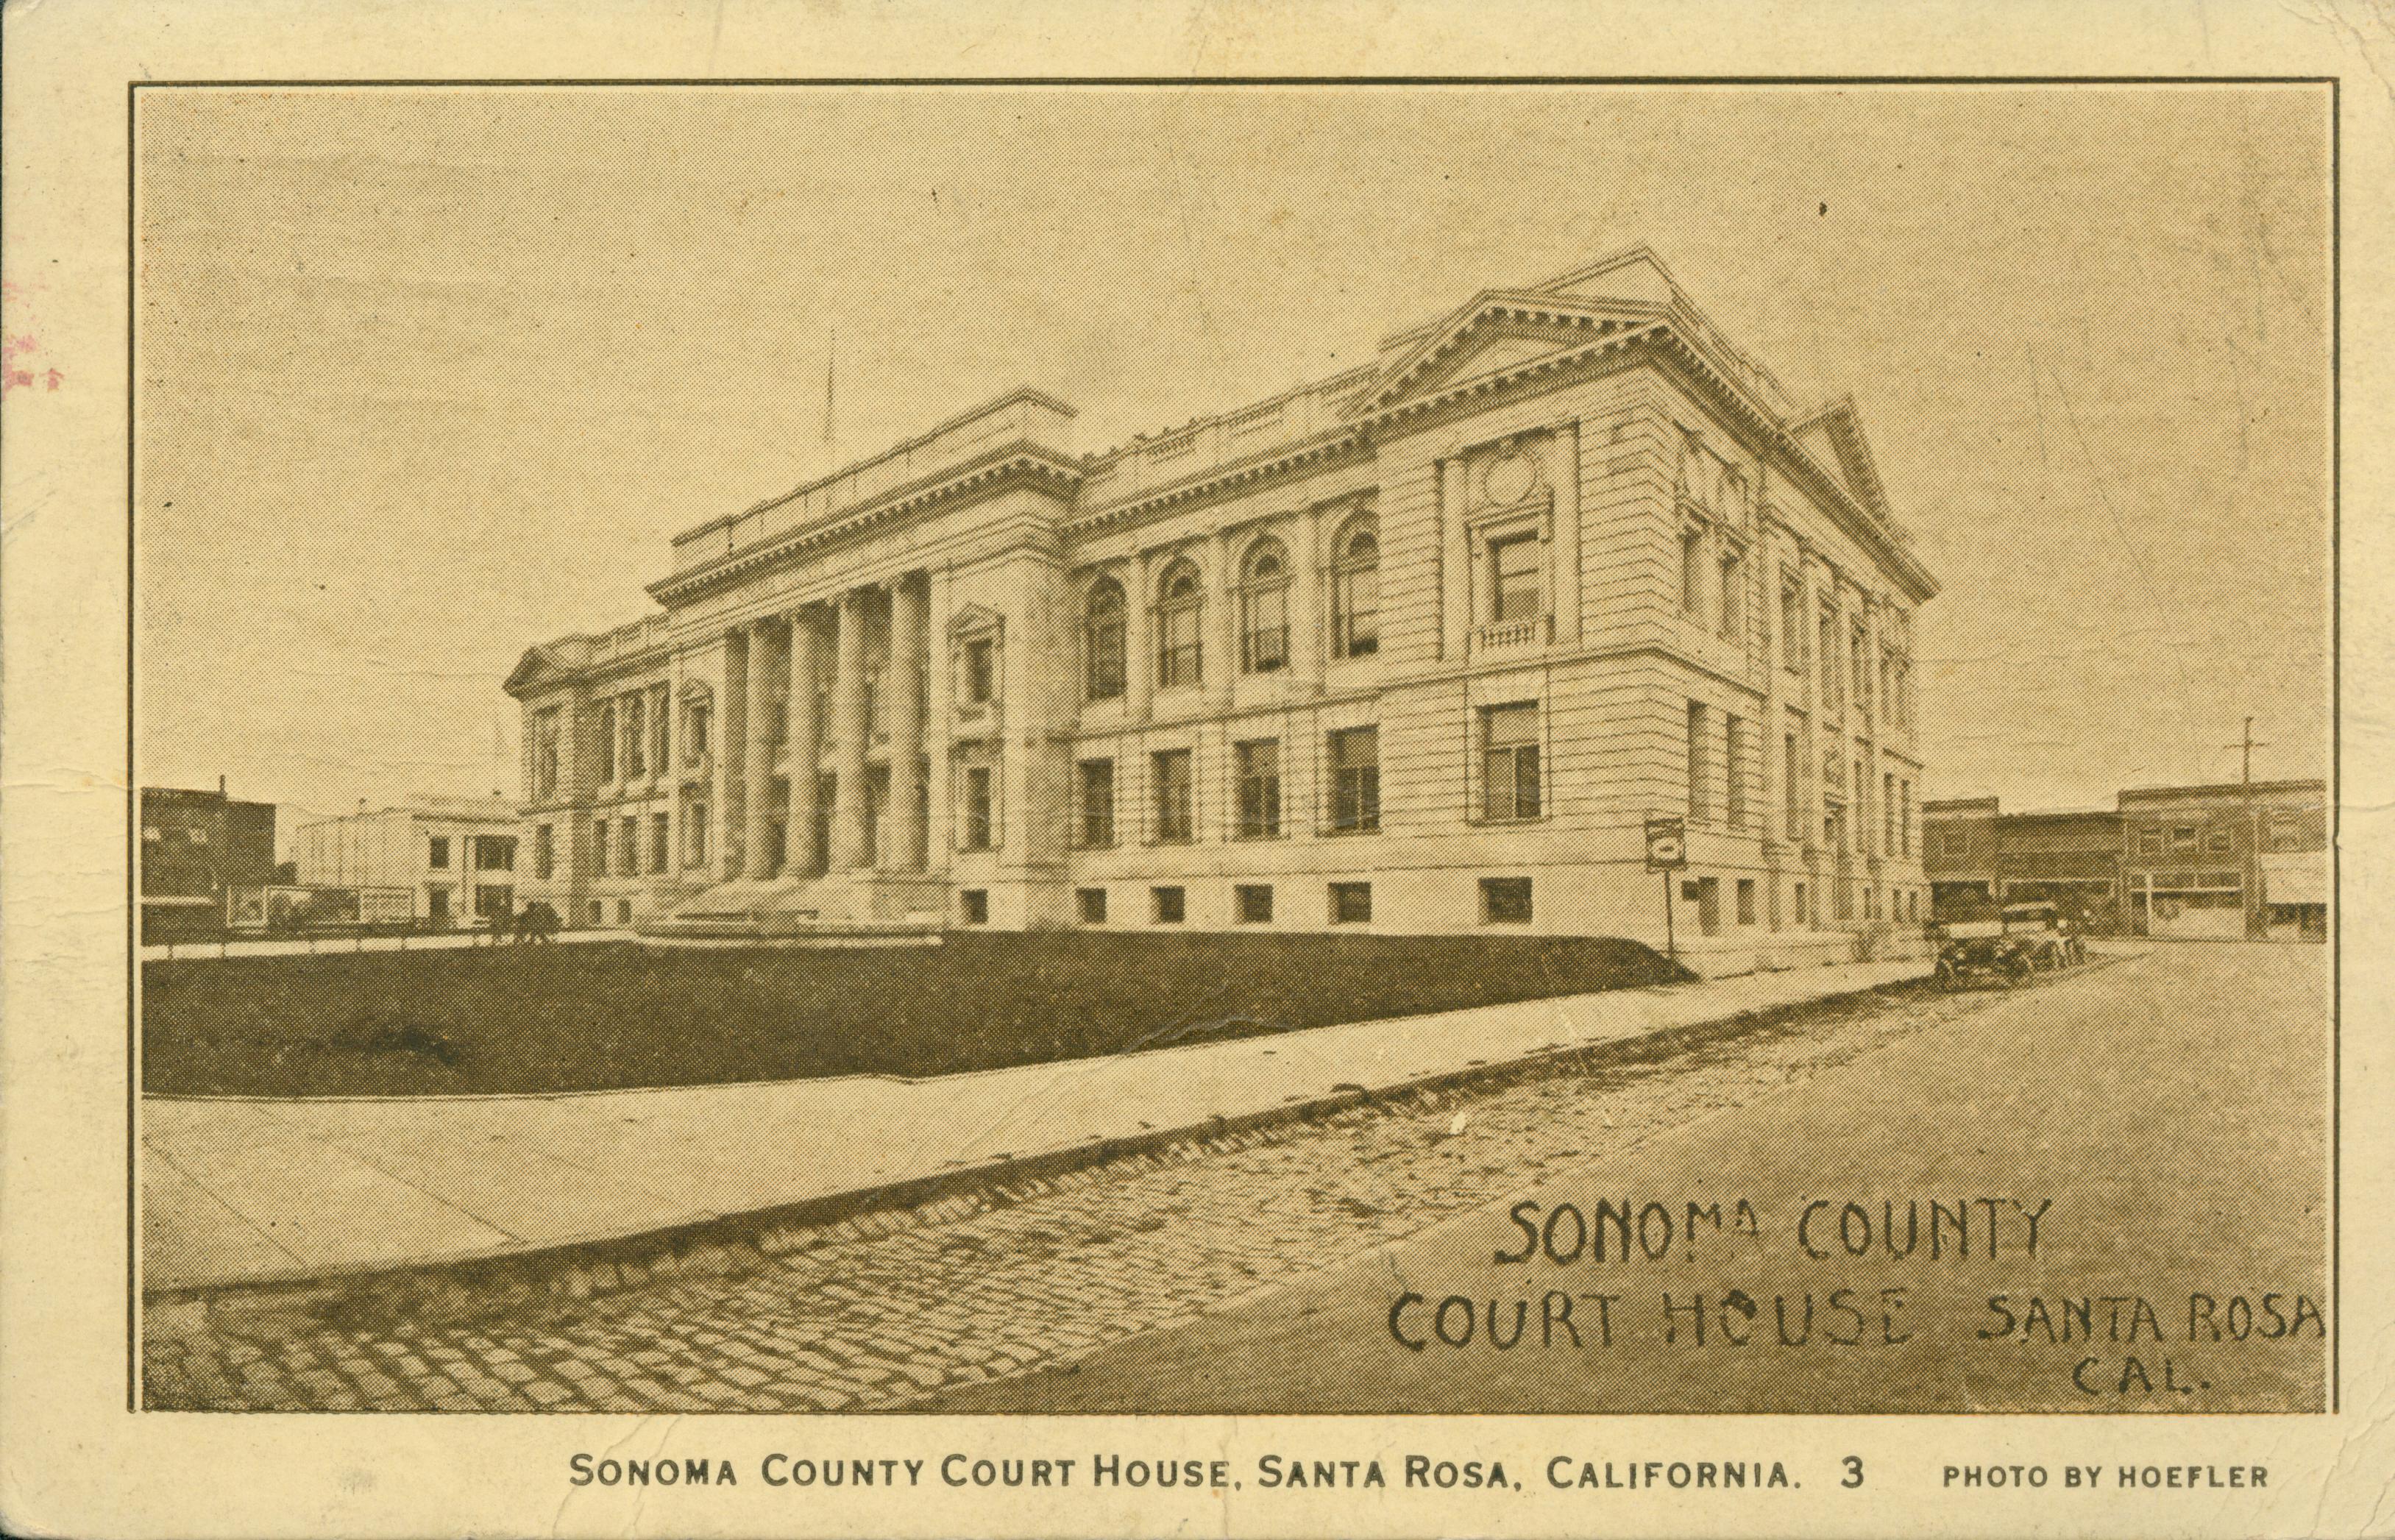 Shows a corner view of the Santa Rosa courthouse